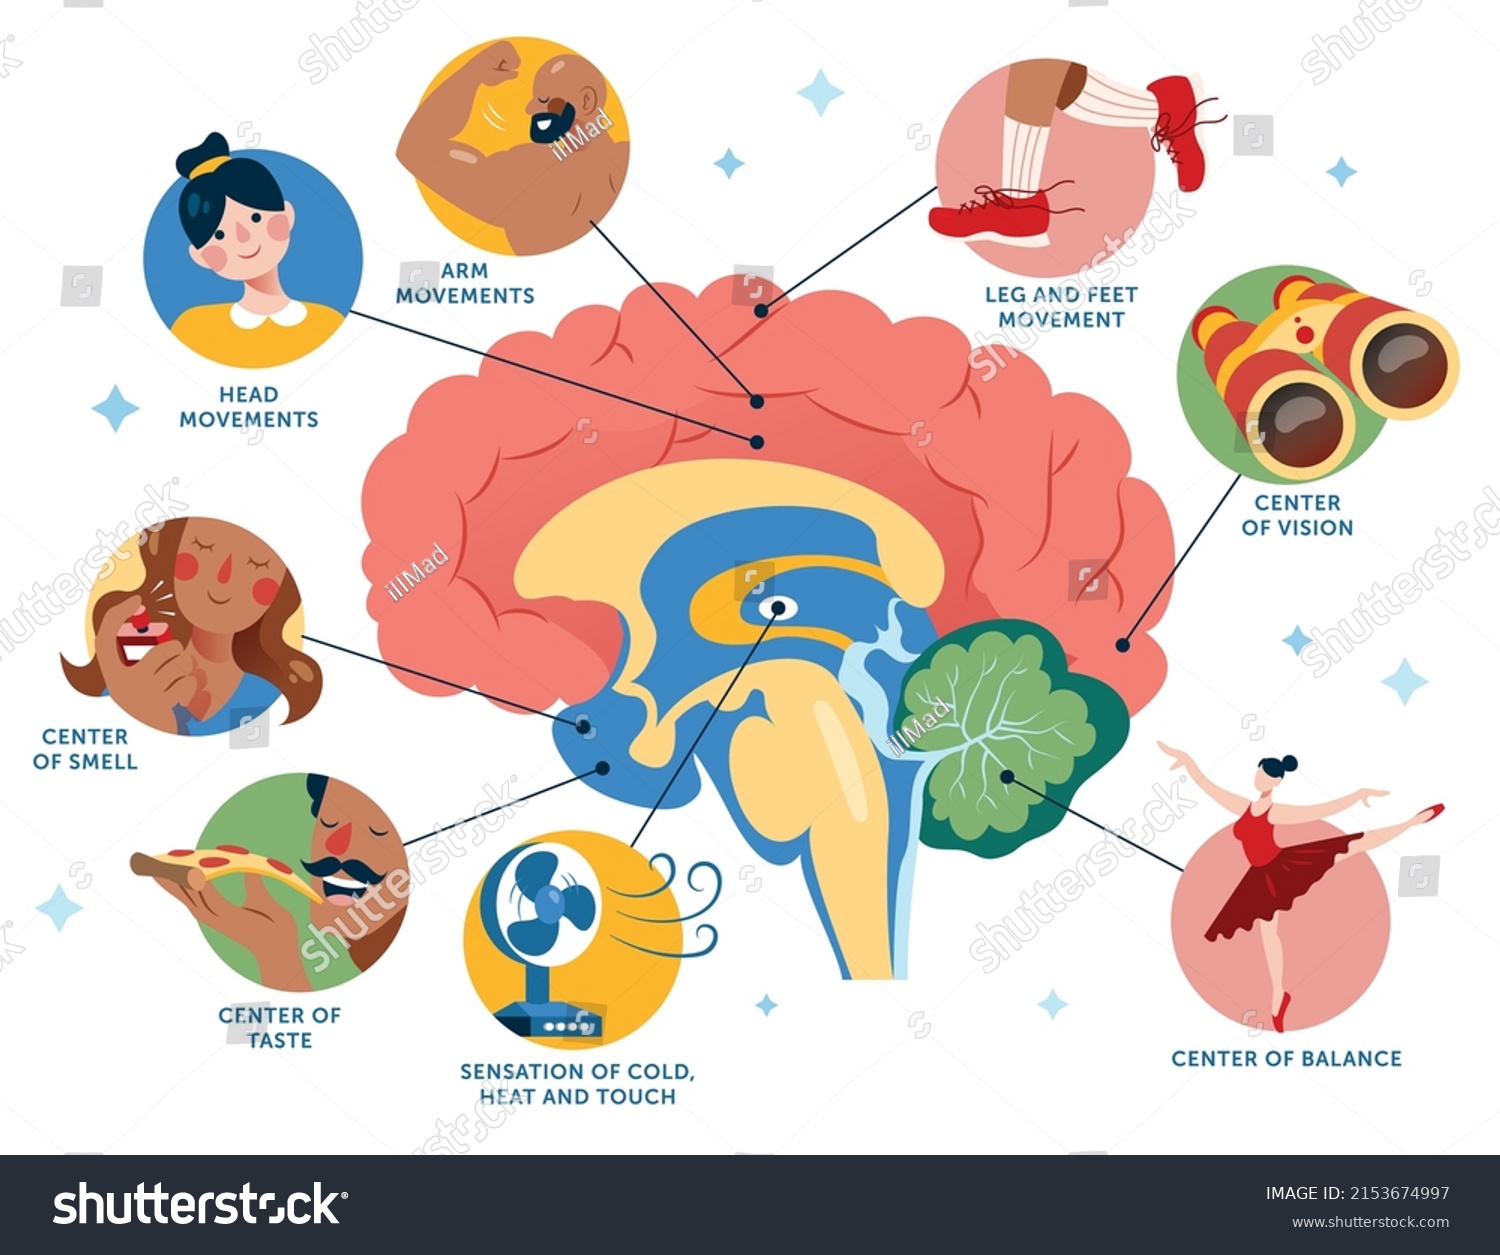 SVG of Brain Center of Functions Illustration. Functional areas of the human brain. svg